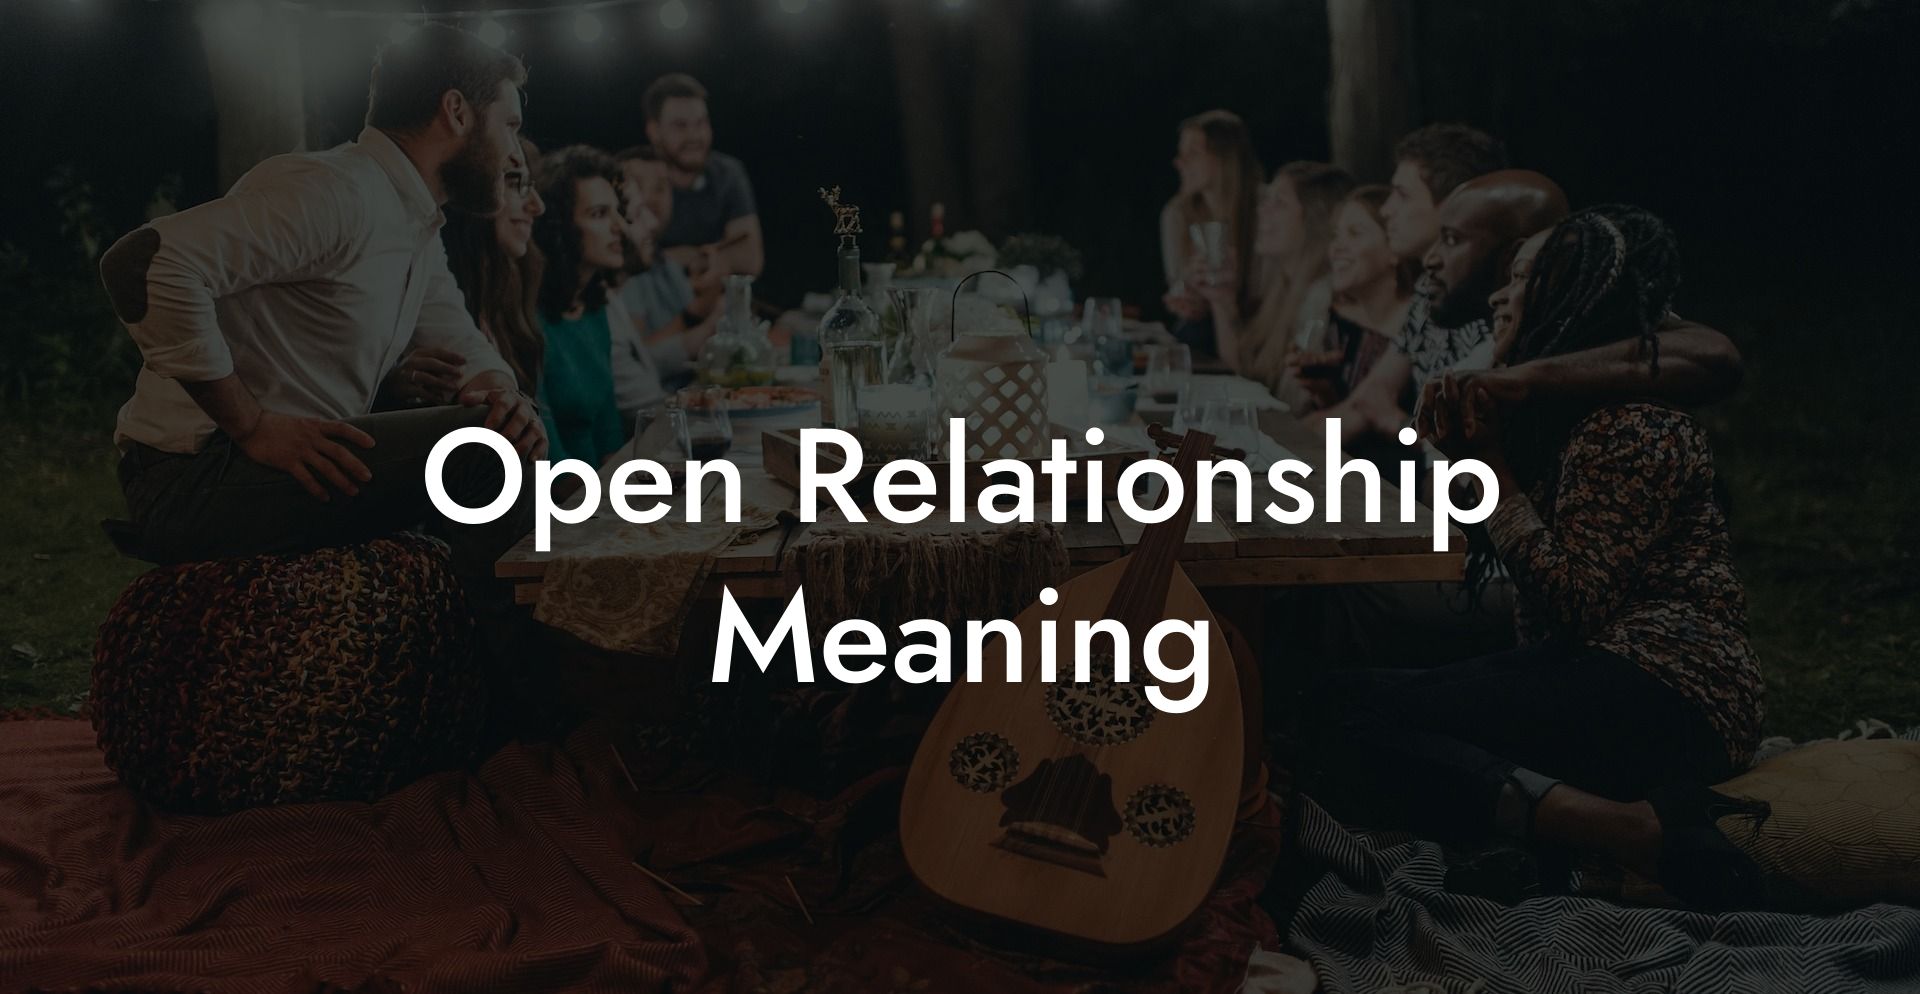 Open Relationship Meaning